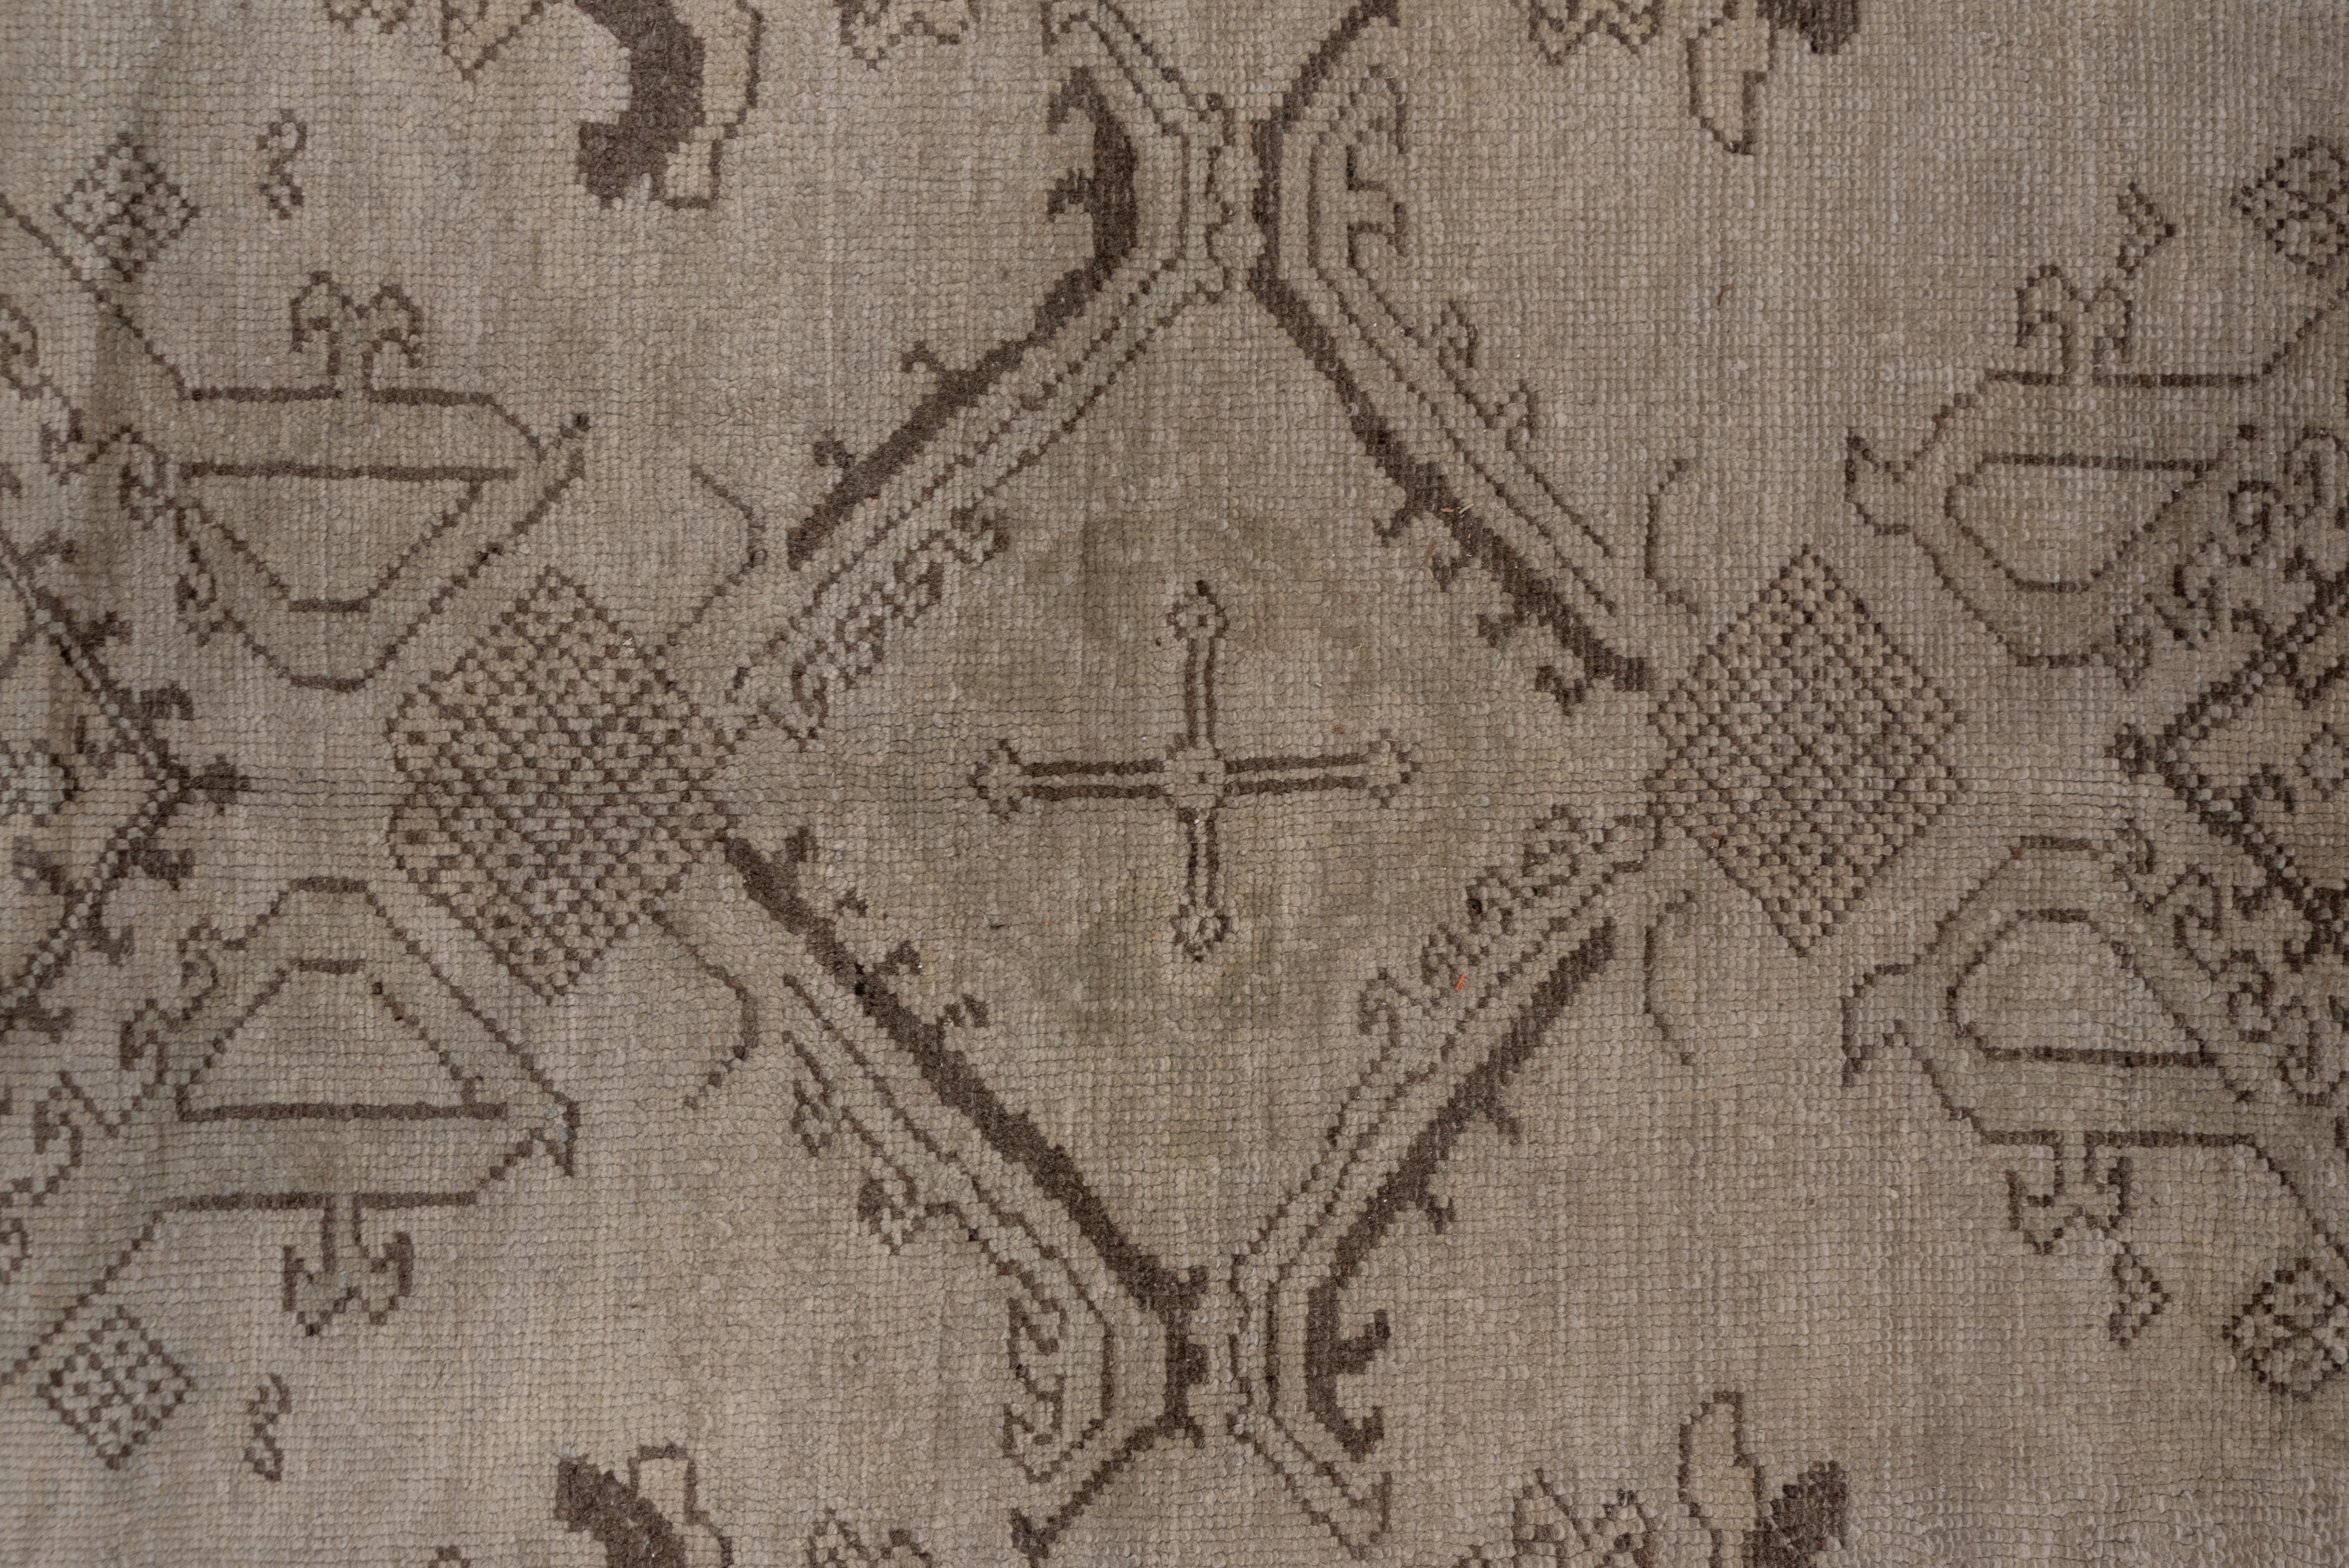 This carpet has a creamy beige field displays a Yaprak (Leaf) and ragged palmette pattern in three complete and two half-columns, accented in straw and rust-brown. The sandy-beige main border displays a quasi-Kufic pattern with enclosed small stars.